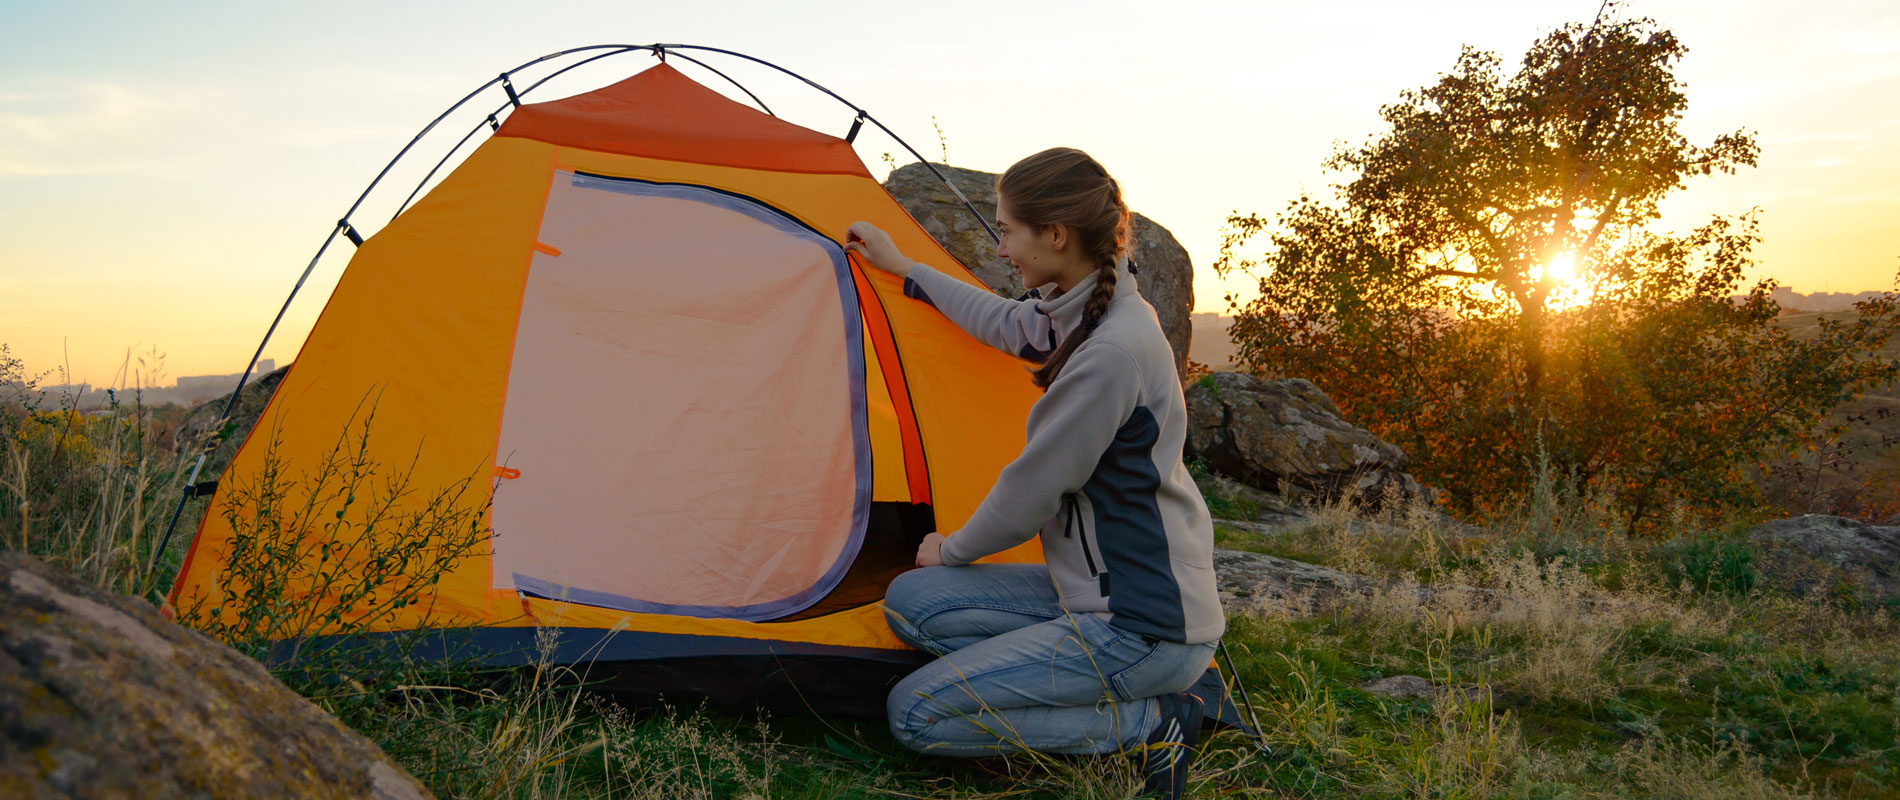 Girl putting up a tent surrounded by nature